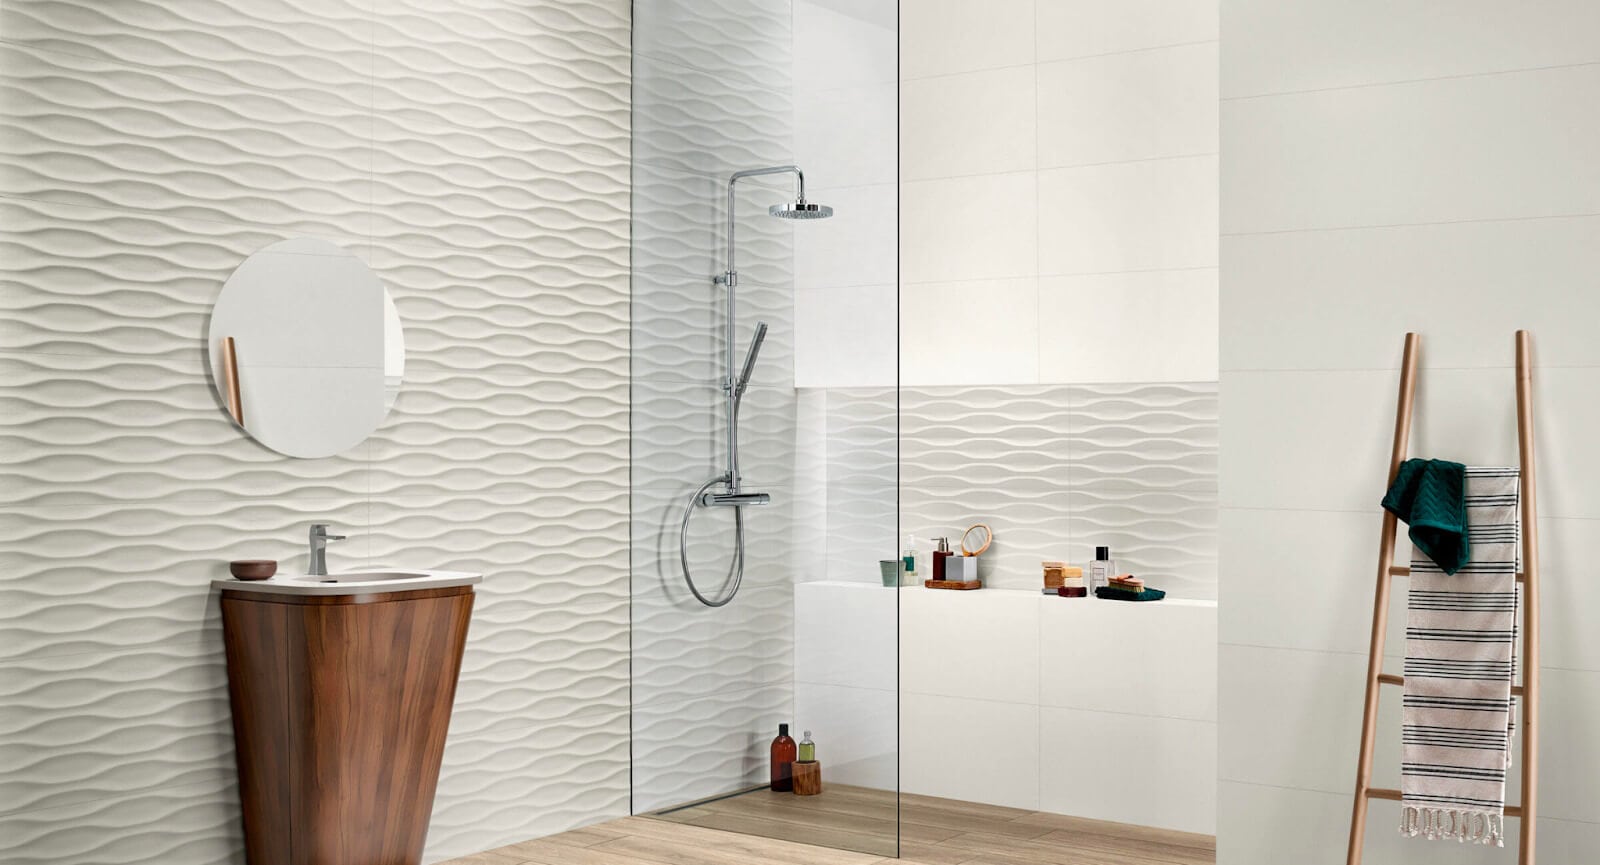 White bathroom with gauged porcelain tile and a wave-like 3D pattern

